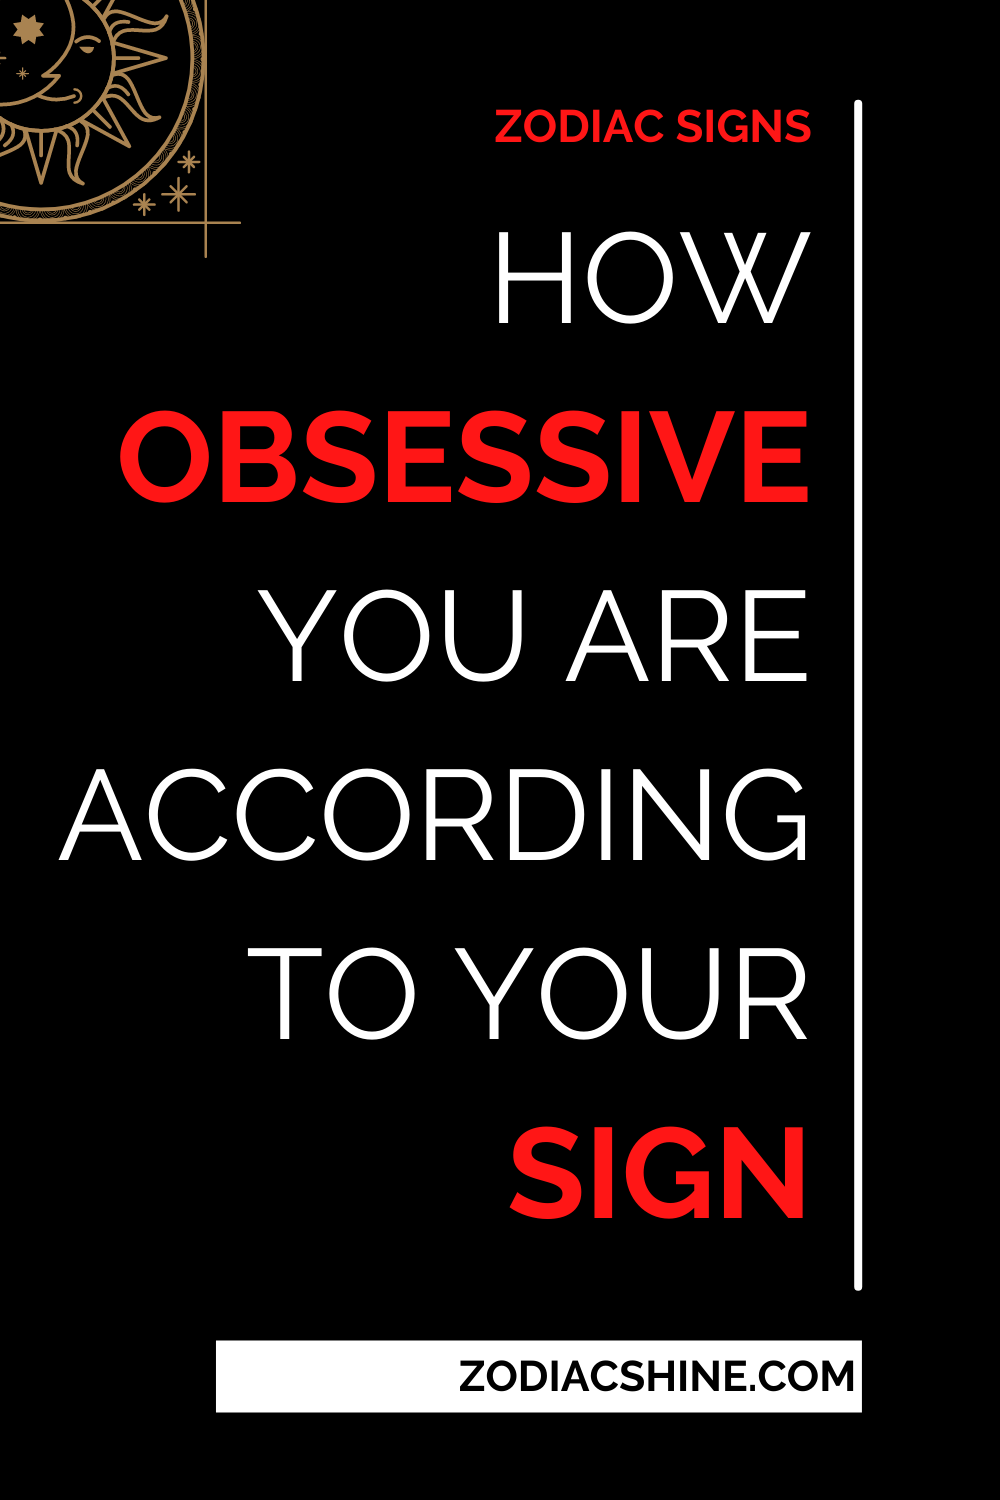 How Obsessive You Are According To Your Sign